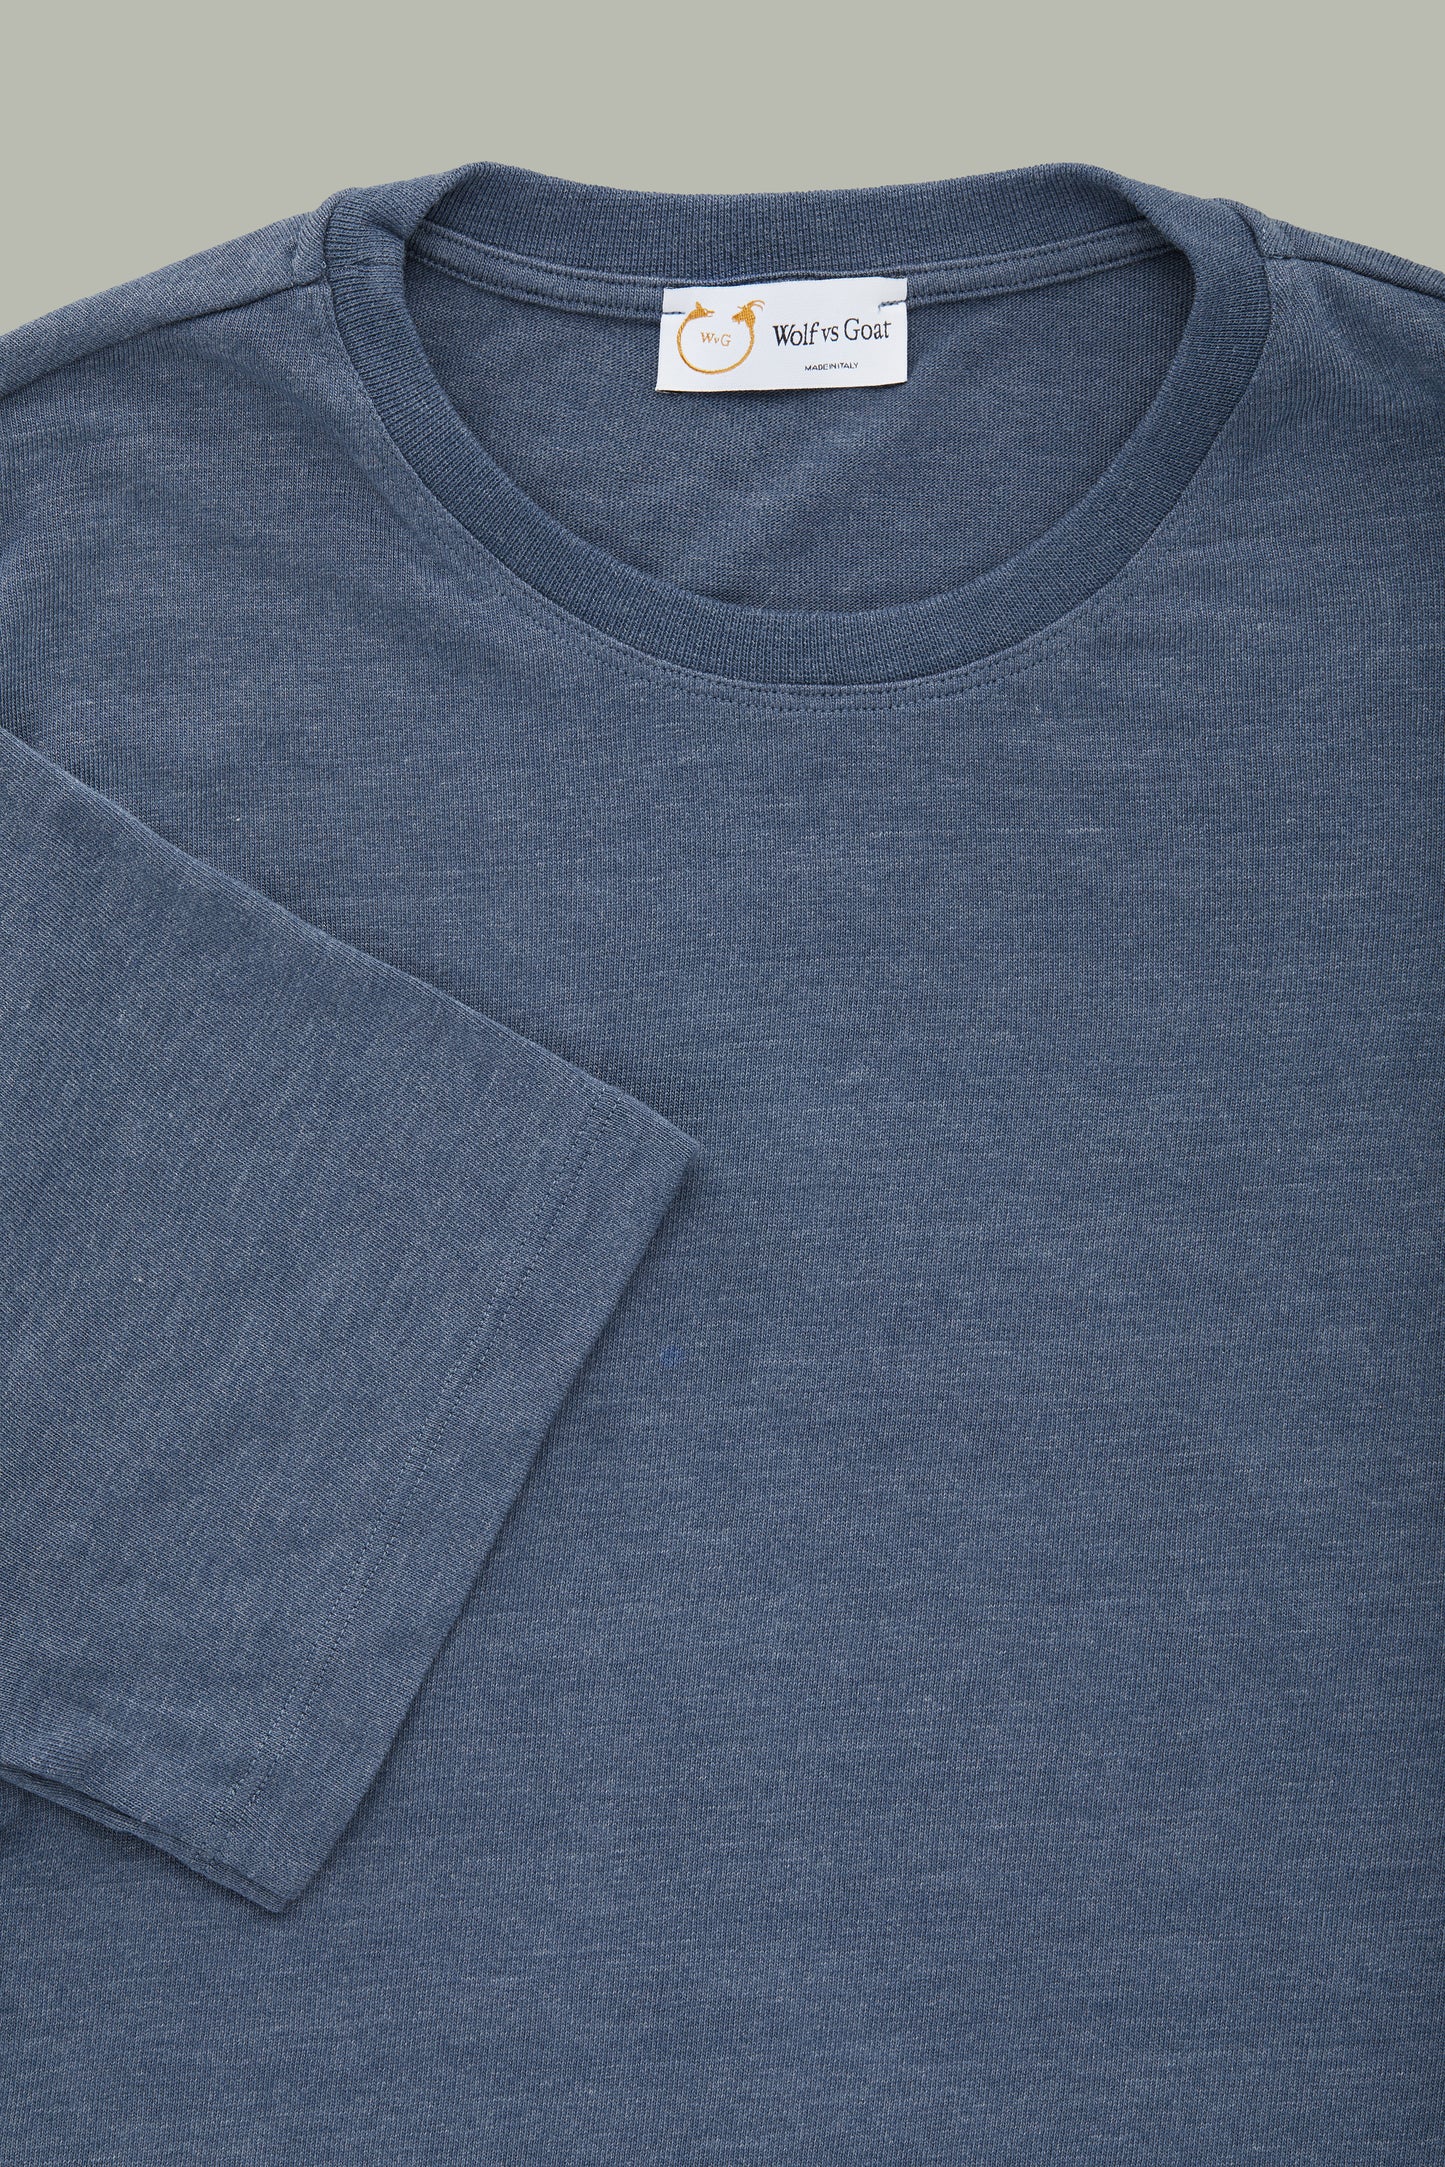 Titus Piccolo 2.0 Short Sleeve Crew Navy Pieced Dyed